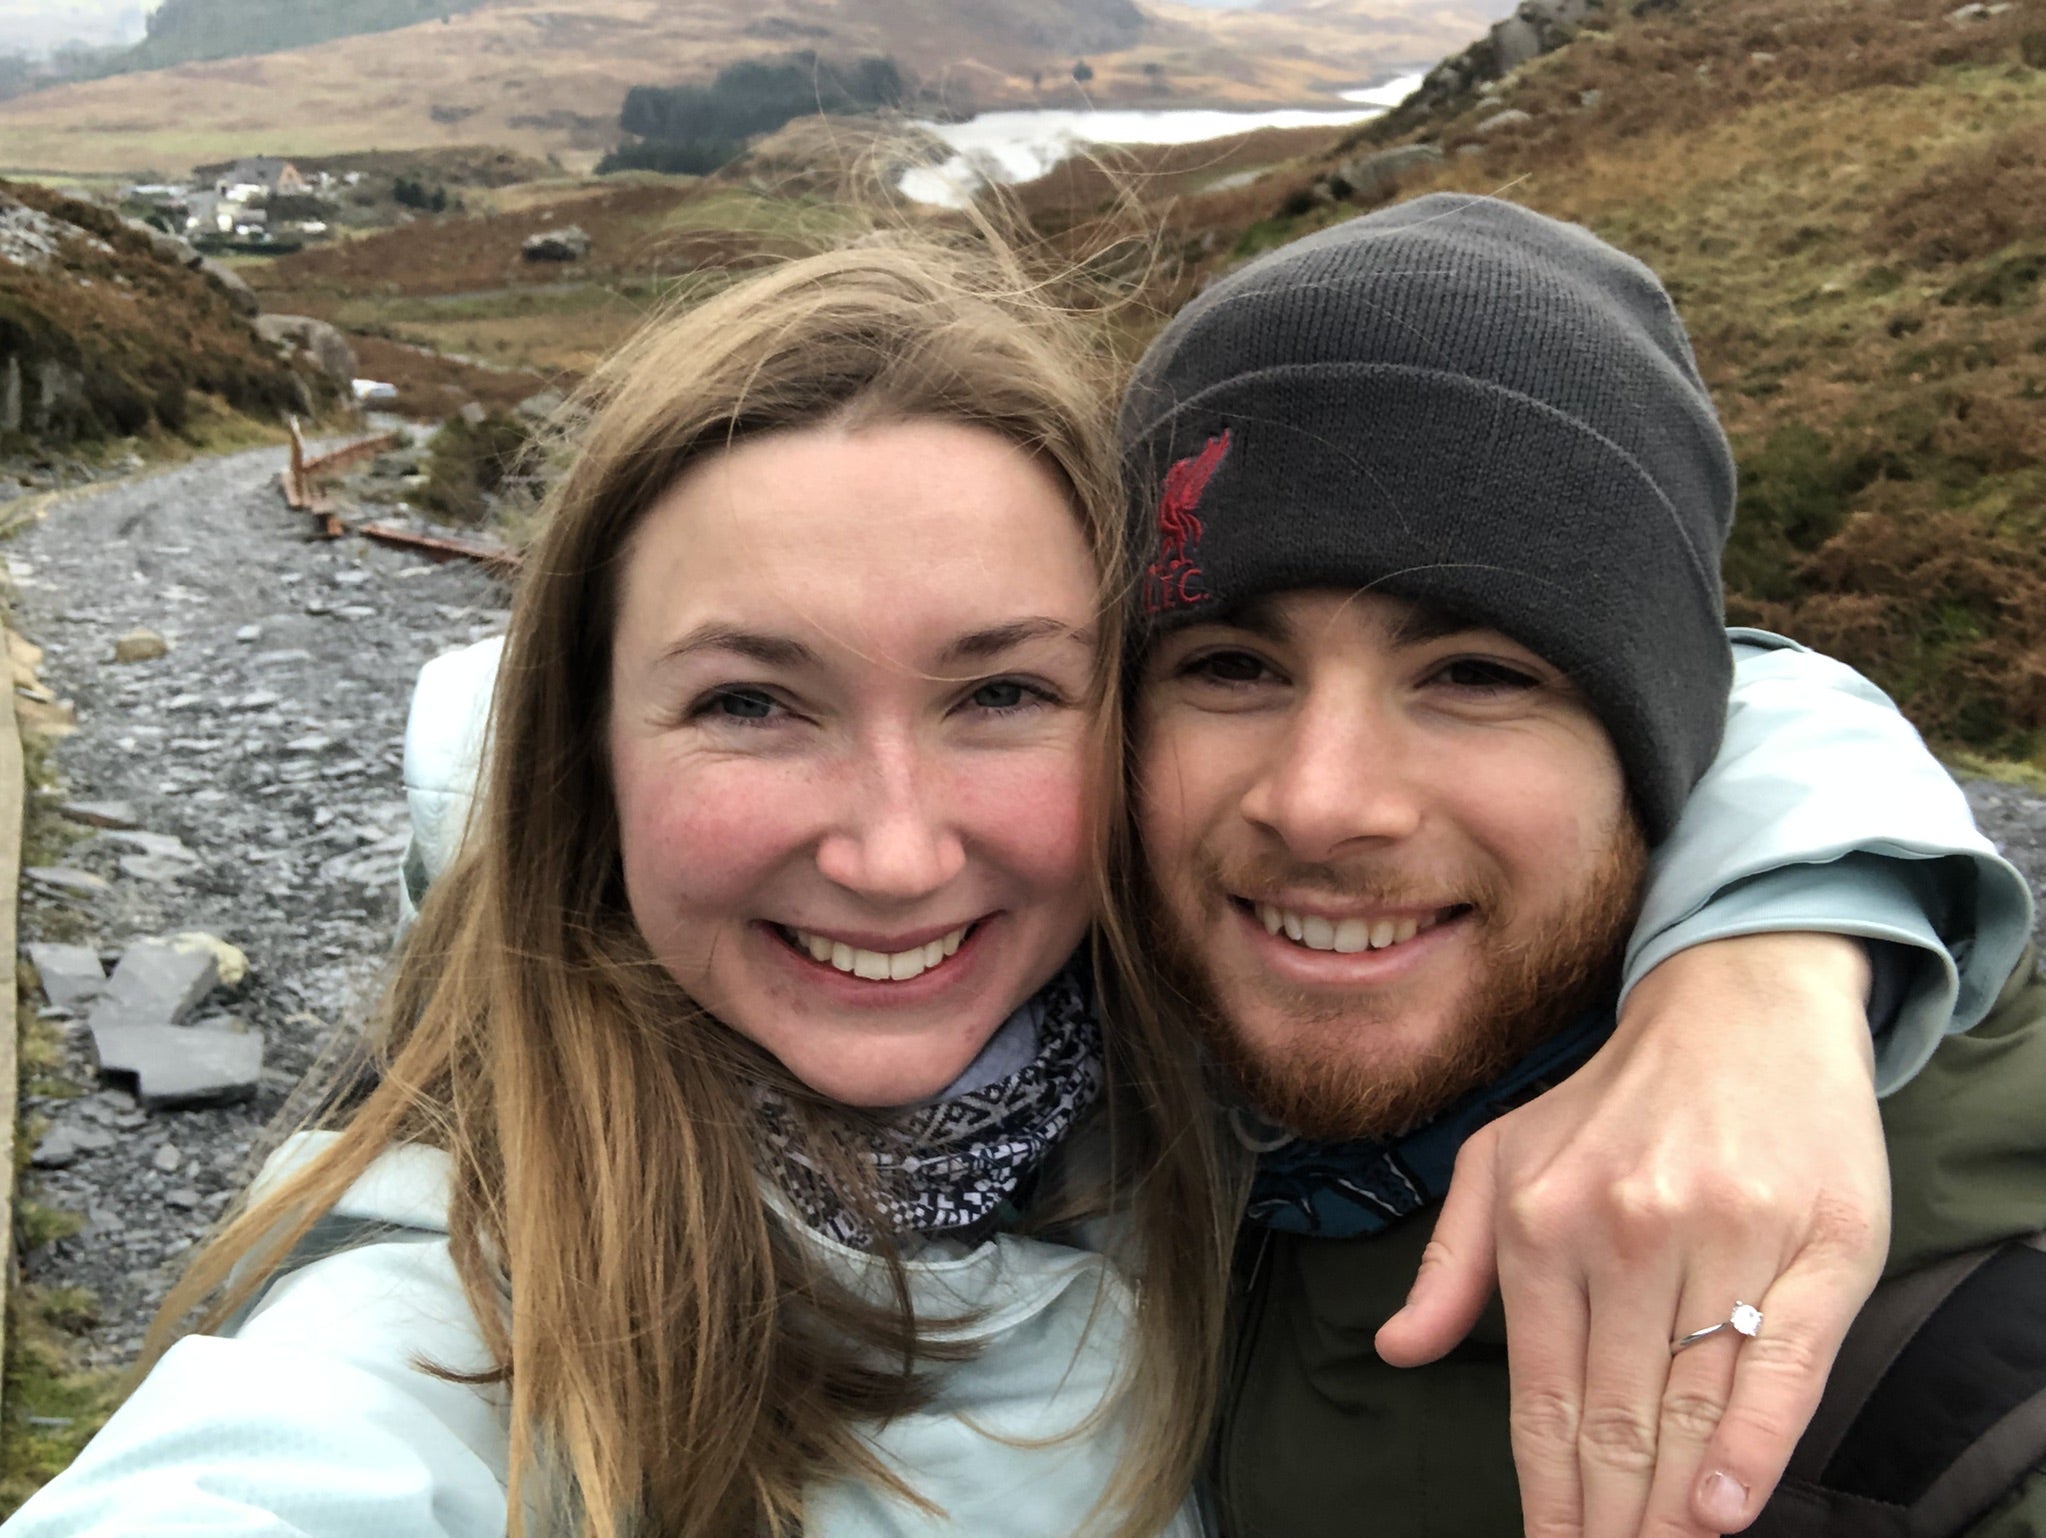 Finn and Annie showing off their engagement ring on a hike